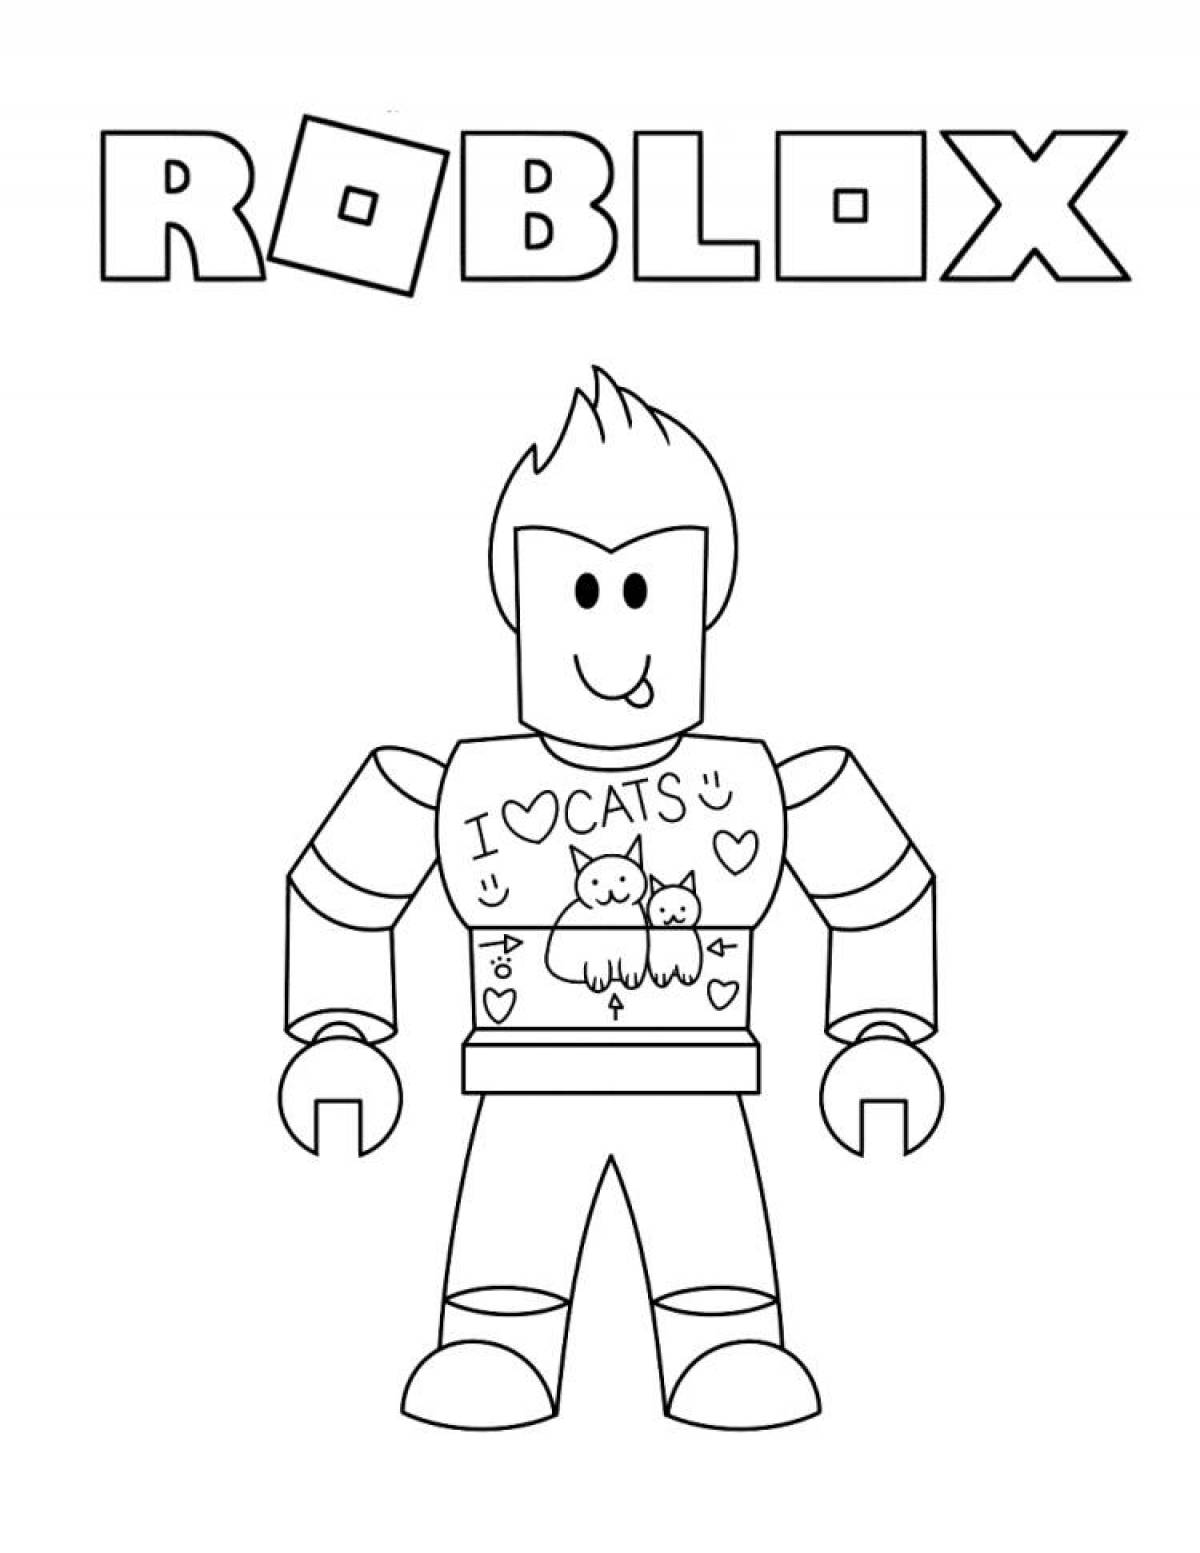 Coloring roblox dors with colored splashes